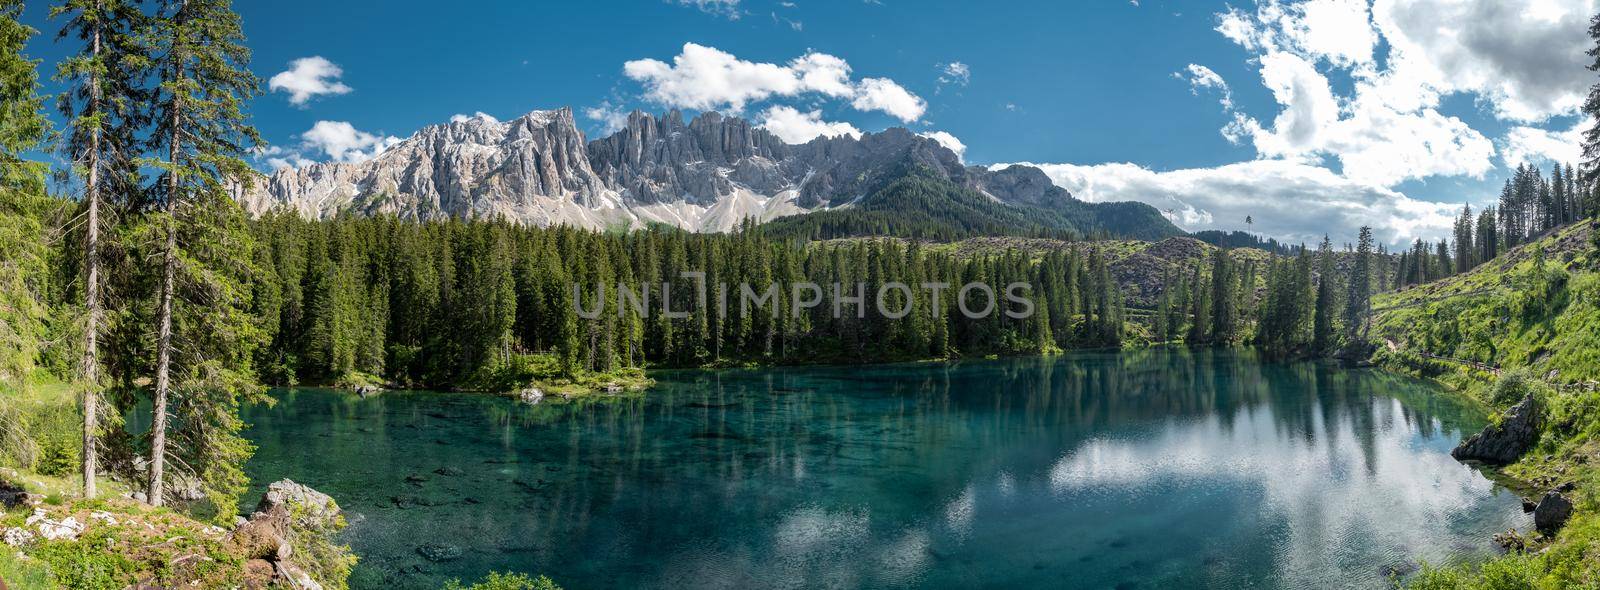 The majestic Lake of Lago di Carezza, beautiful green and turquoise colors in Dolomites mountains Italy,South tyrol, Italy. Landscape of Lake Carezza or Karersee  by fokkebok